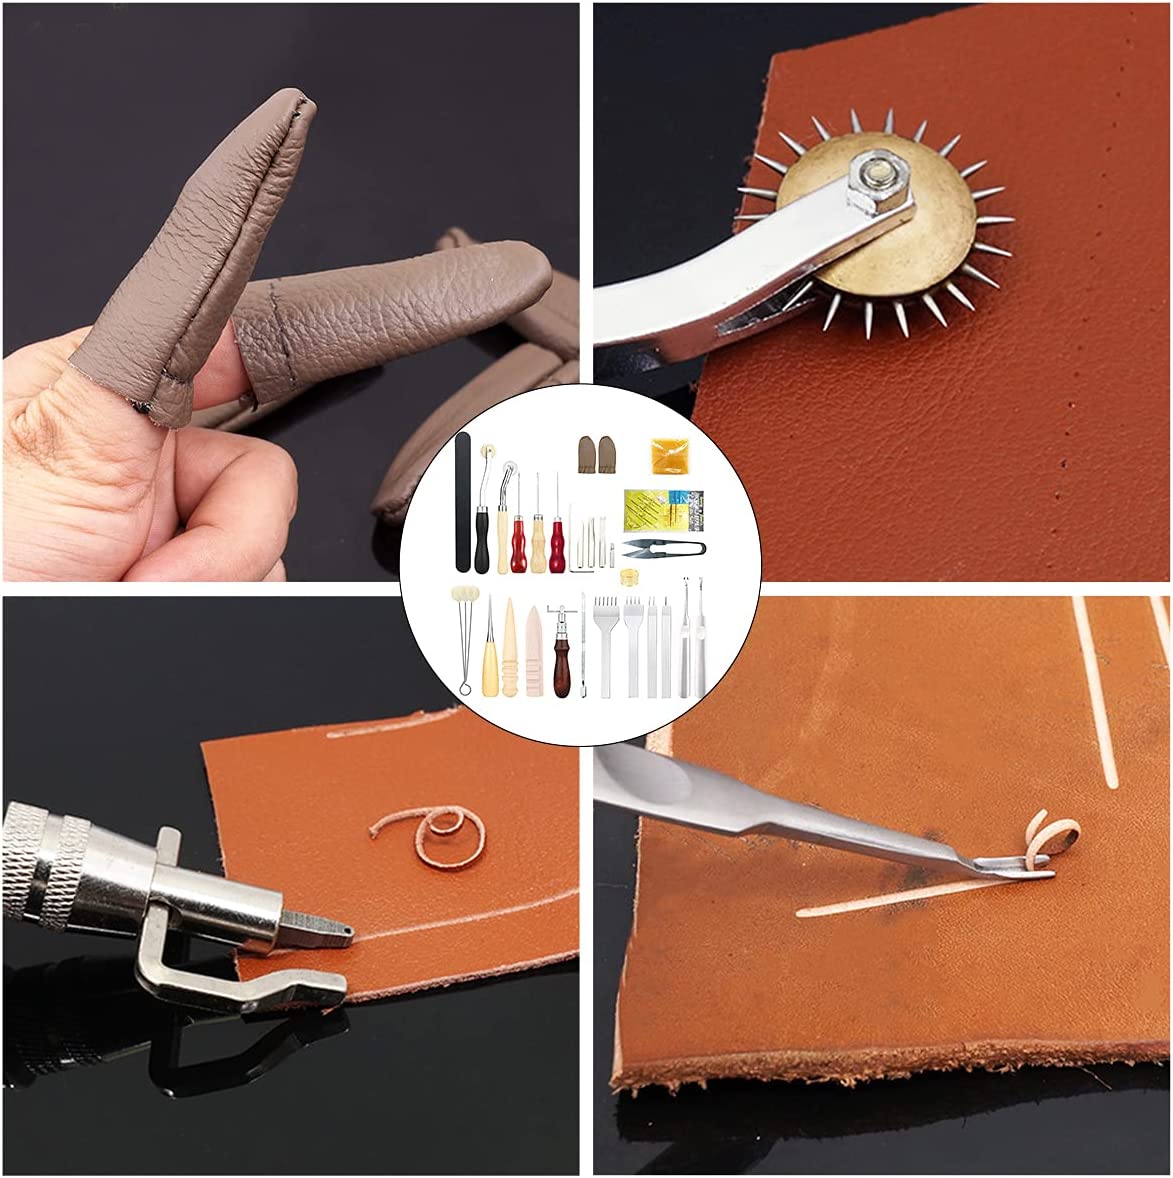 PLANTIONAL Leather Crafting Tools and Supplies: 26 Pieces Leather Working Tools Set with Groover Awl Waxed Thread Thimble Kit for Stitching Punching